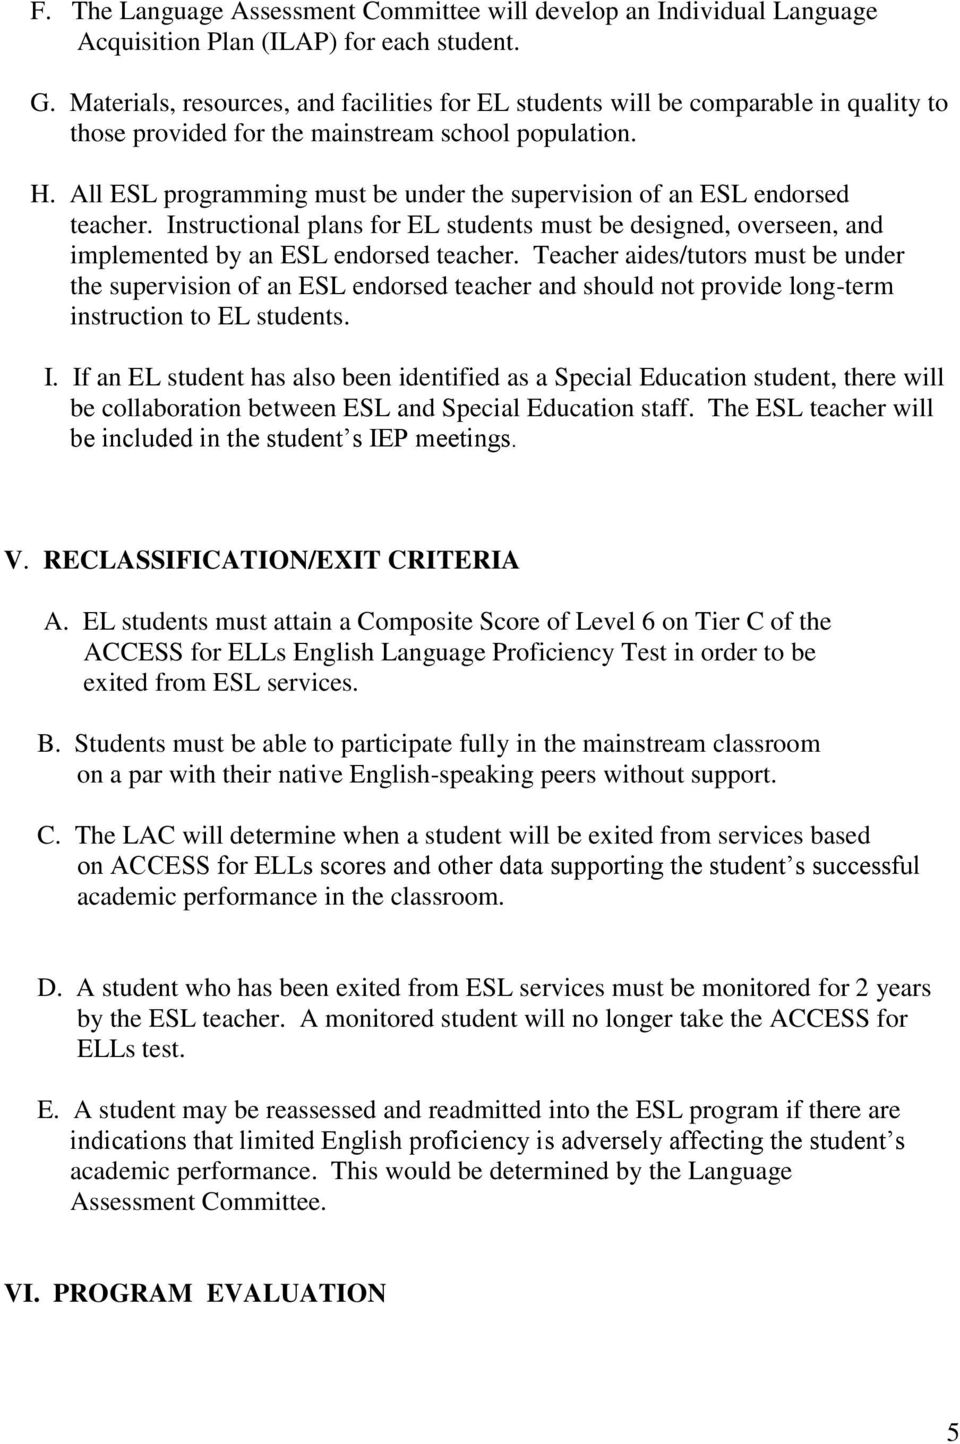 All ESL programming must be under the supervision of an ESL endorsed teacher. Instructional plans for EL students must be designed, overseen, and implemented by an ESL endorsed teacher.